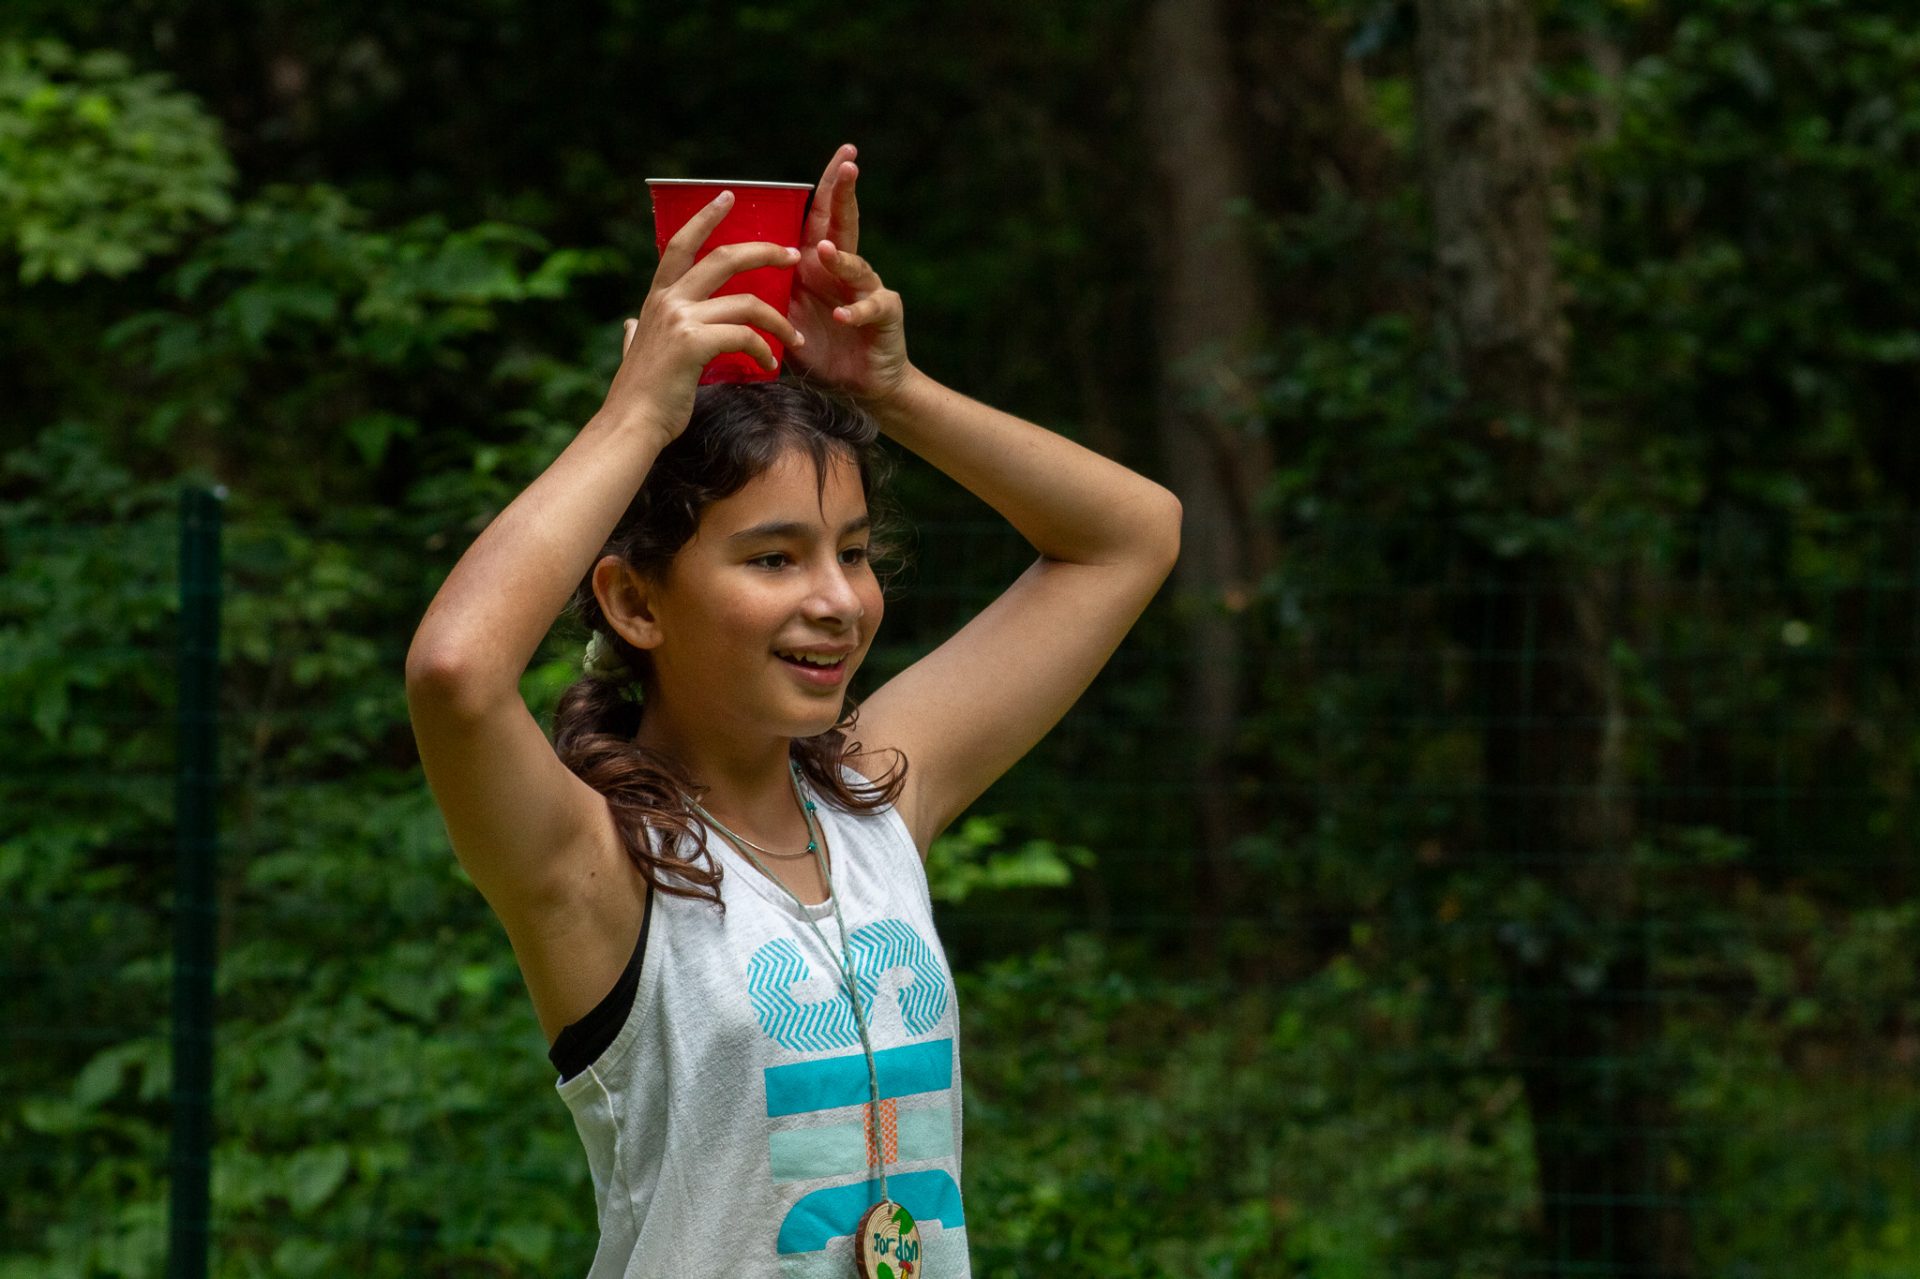 camper in a white tank top with blue words carries a red solo cup on top of her head near trees